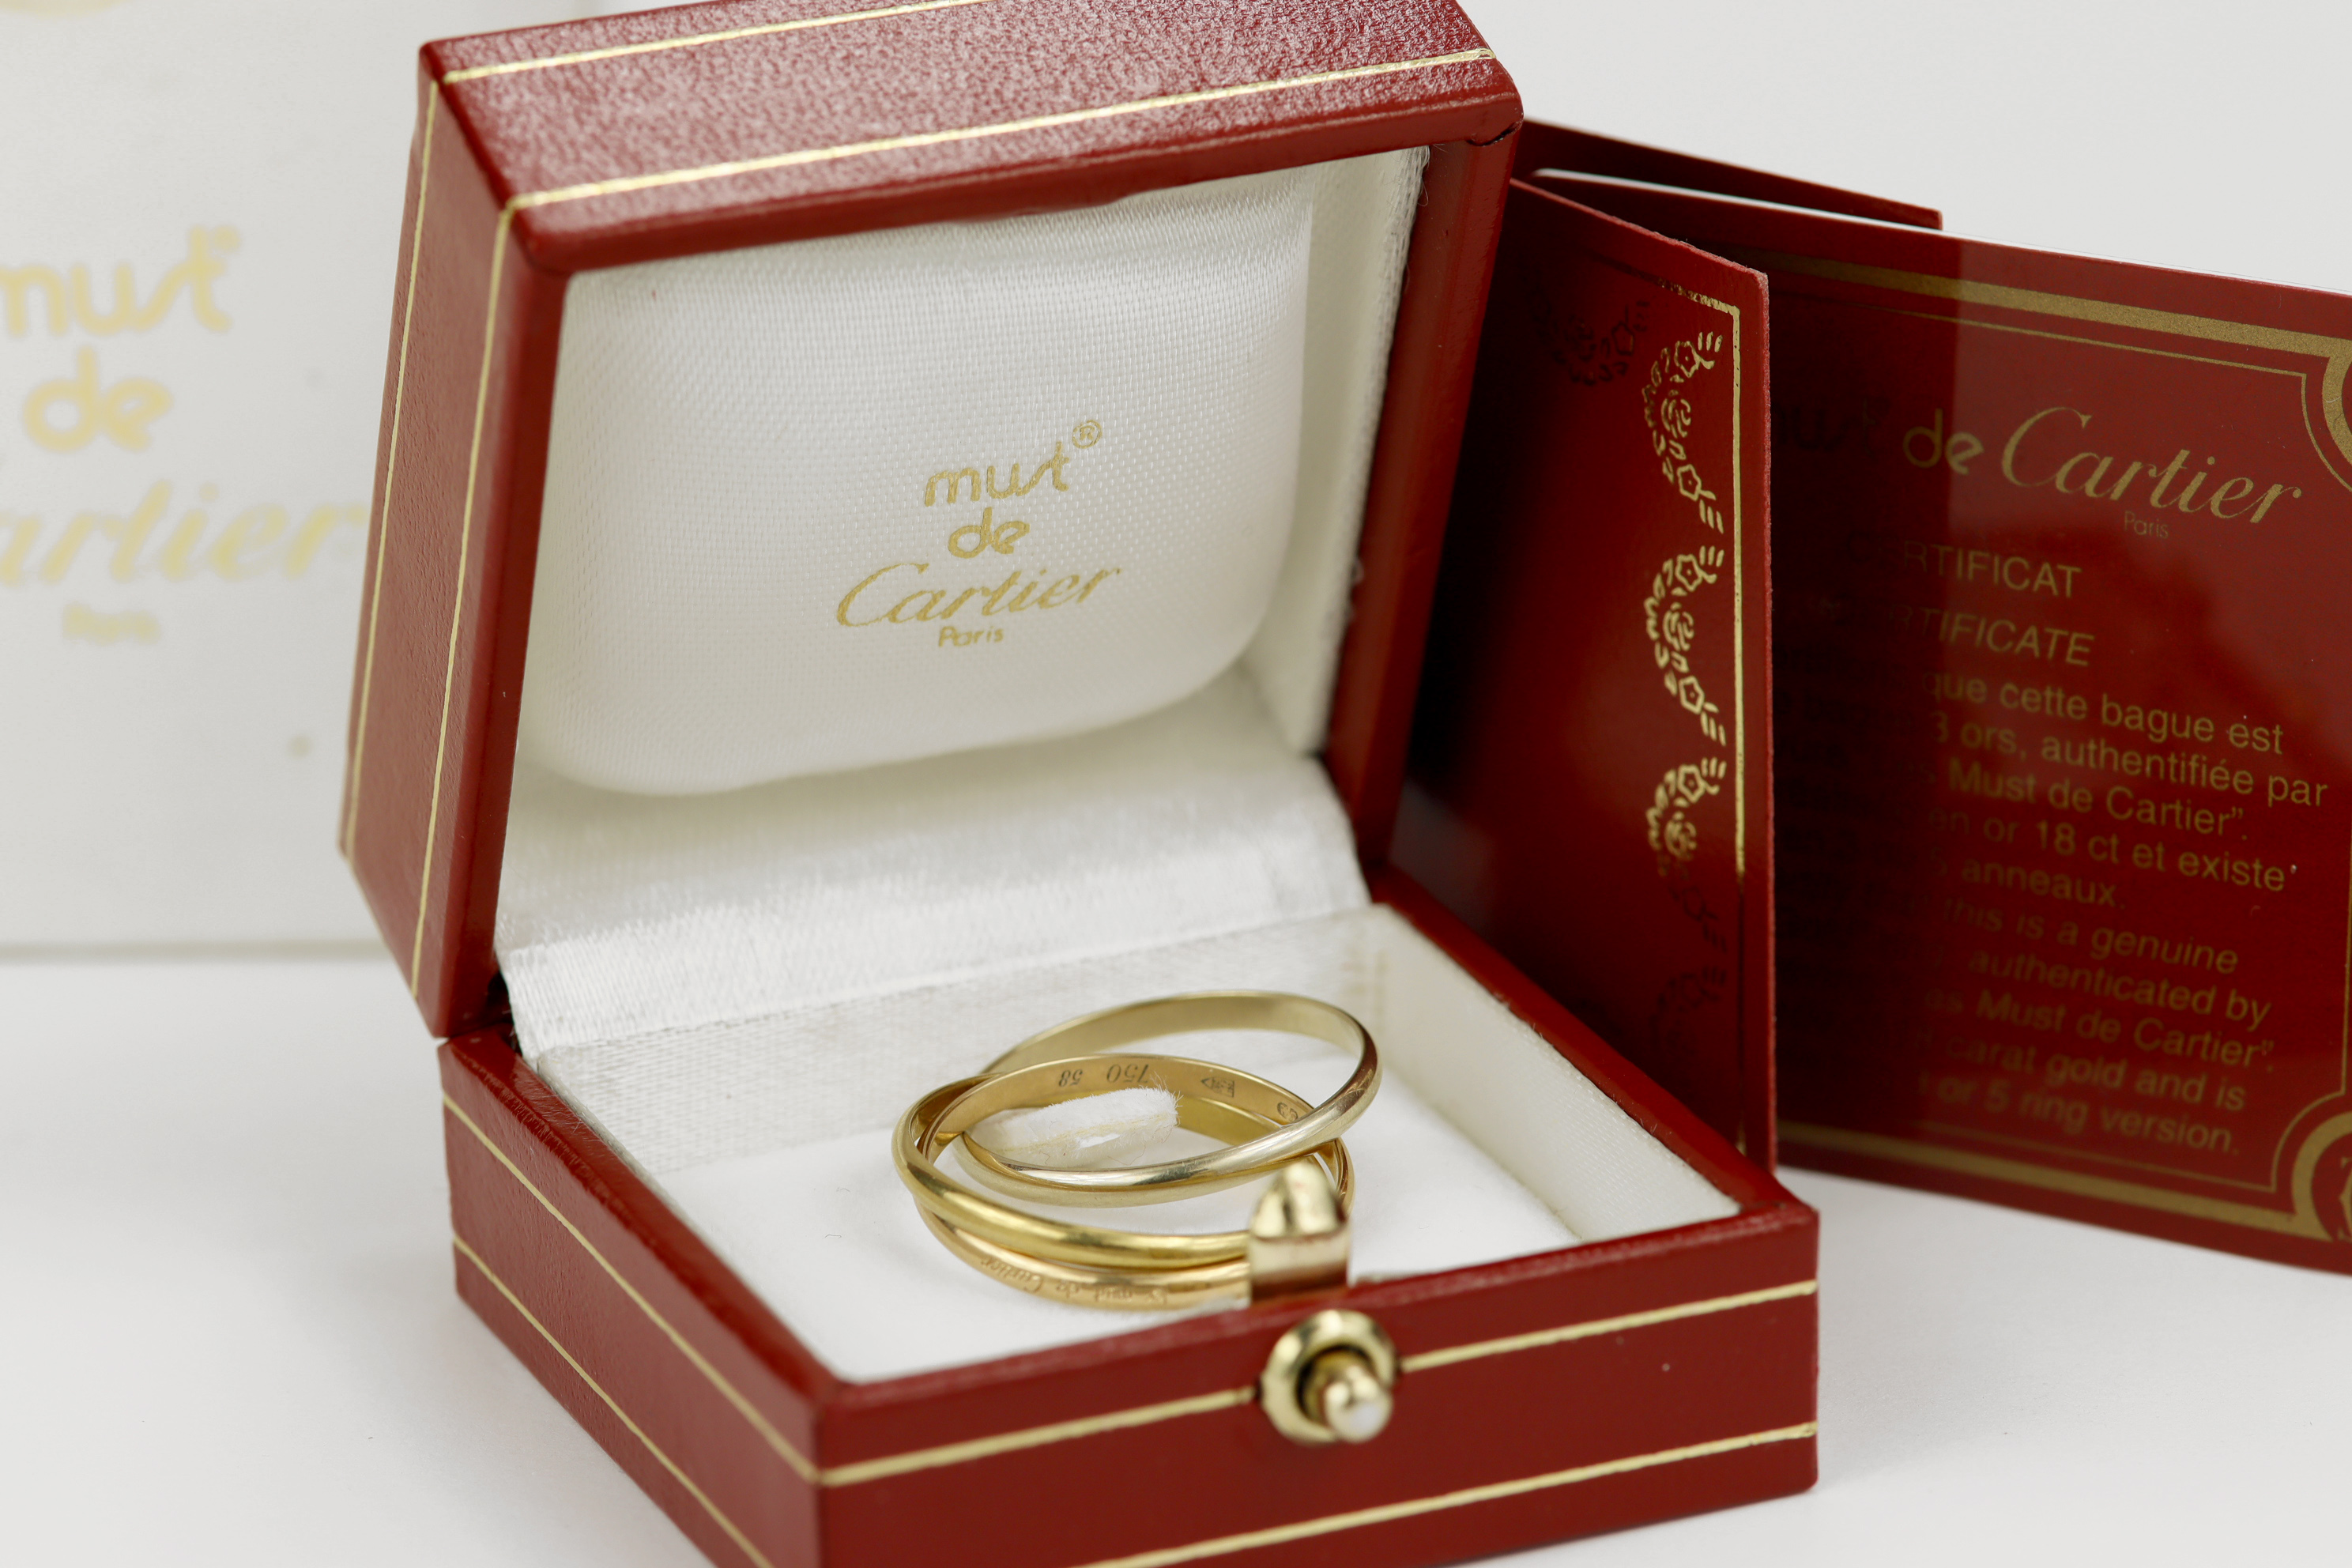 18ct Cartier 'Trinity' ring, classic 'Russian' wedding ring made up of yellow, white and rose gold - Image 2 of 2